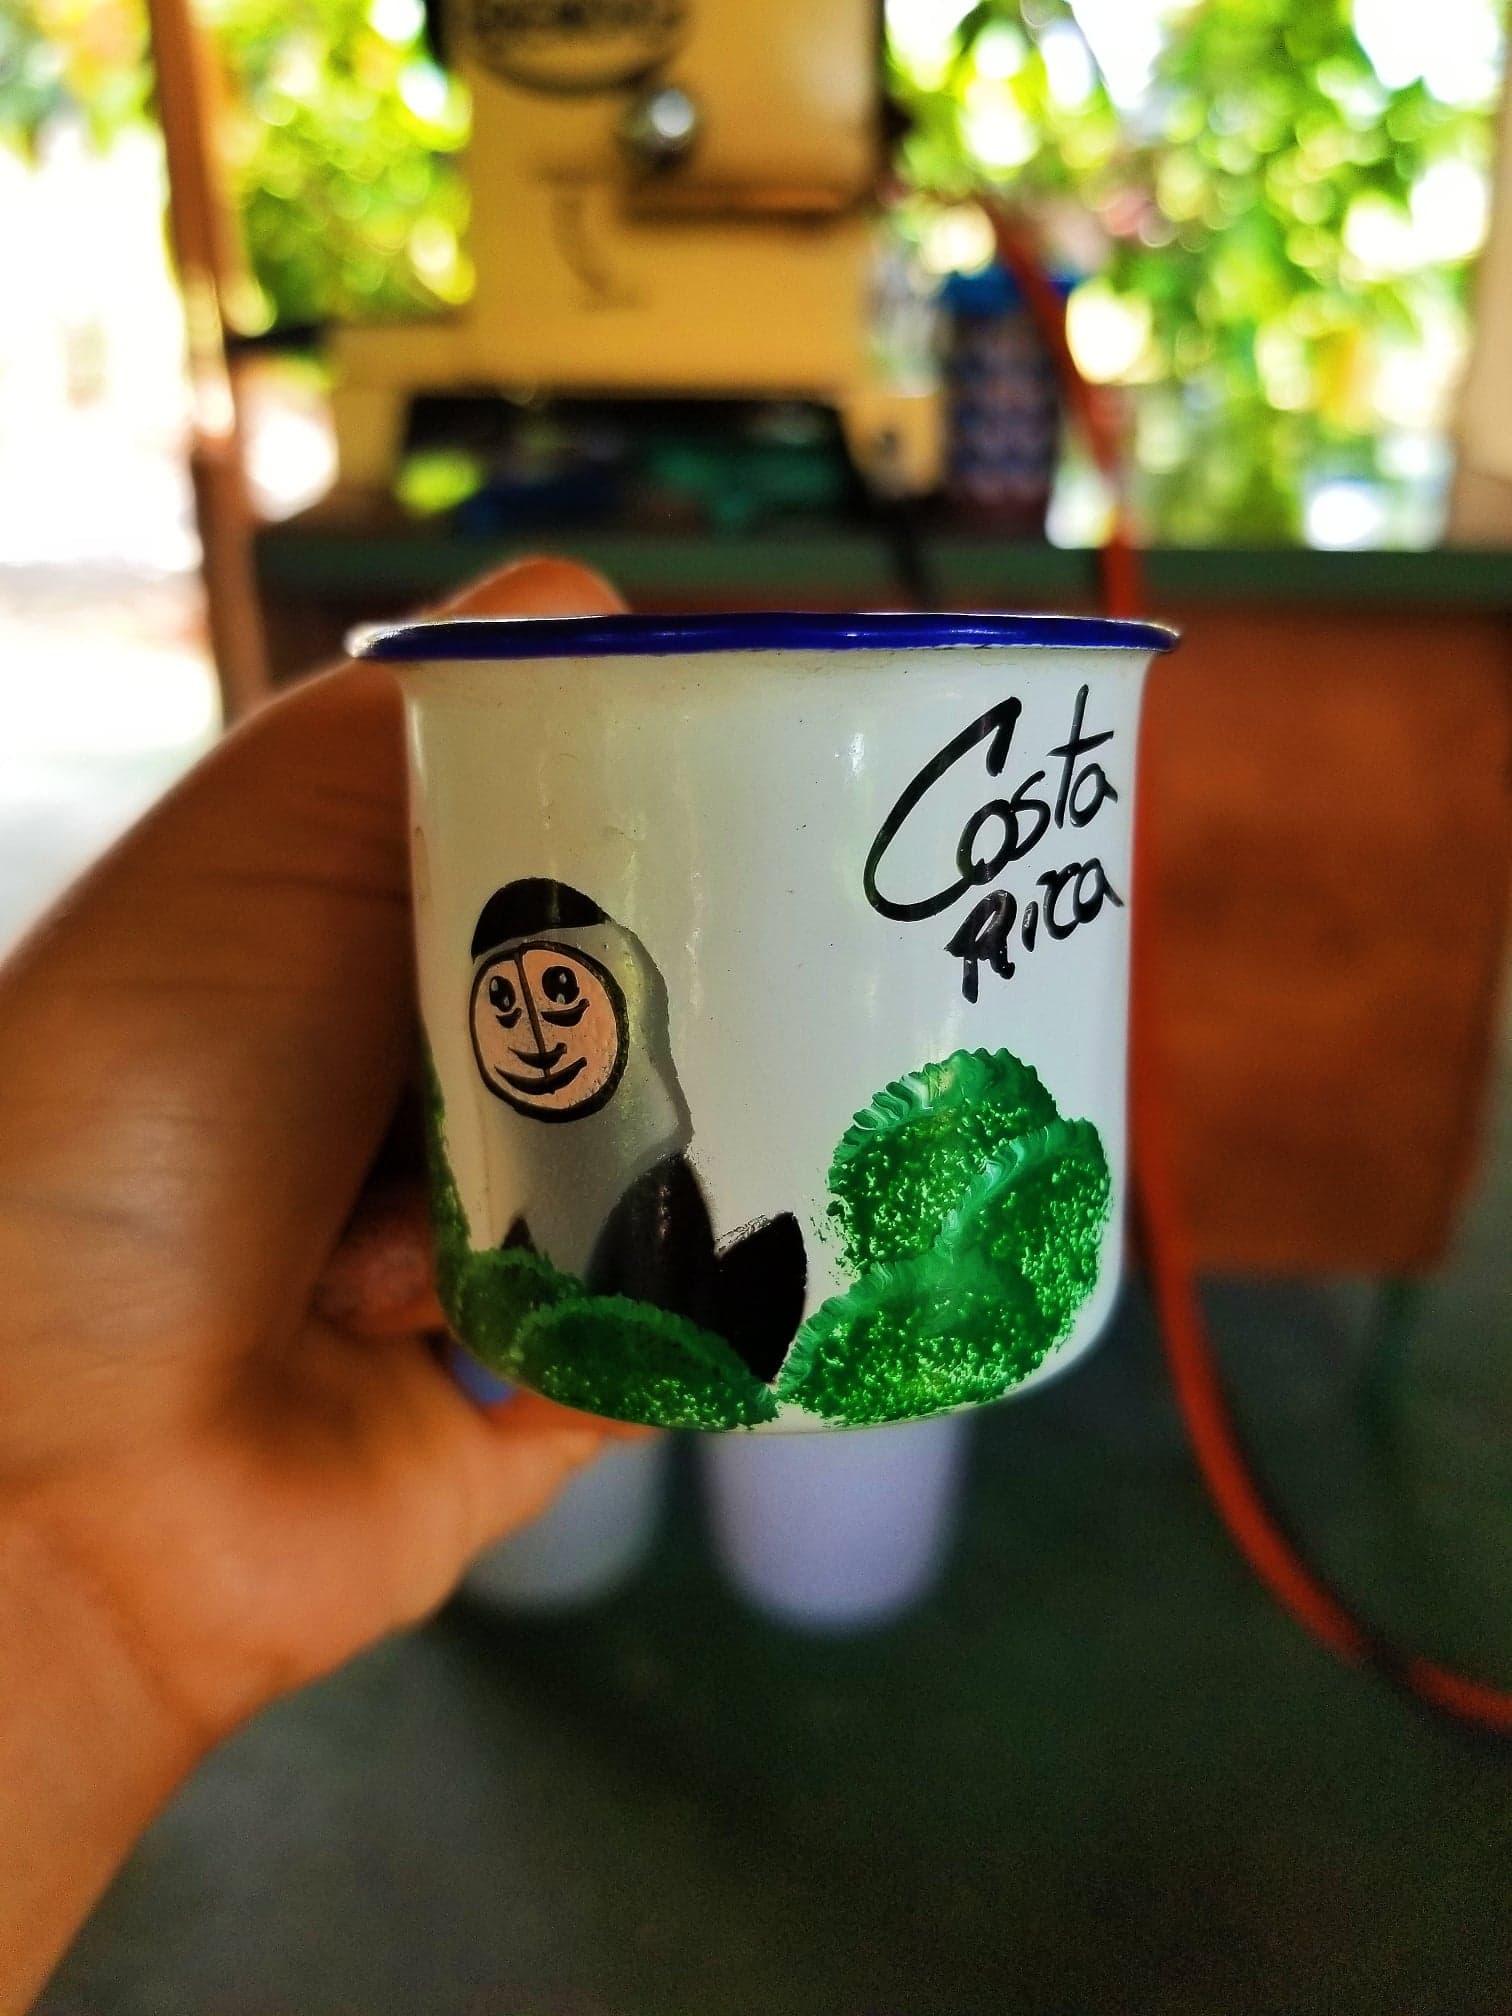 Holding a cup with an image of a monkey on a tree and 'Costa Rica' written across it. 